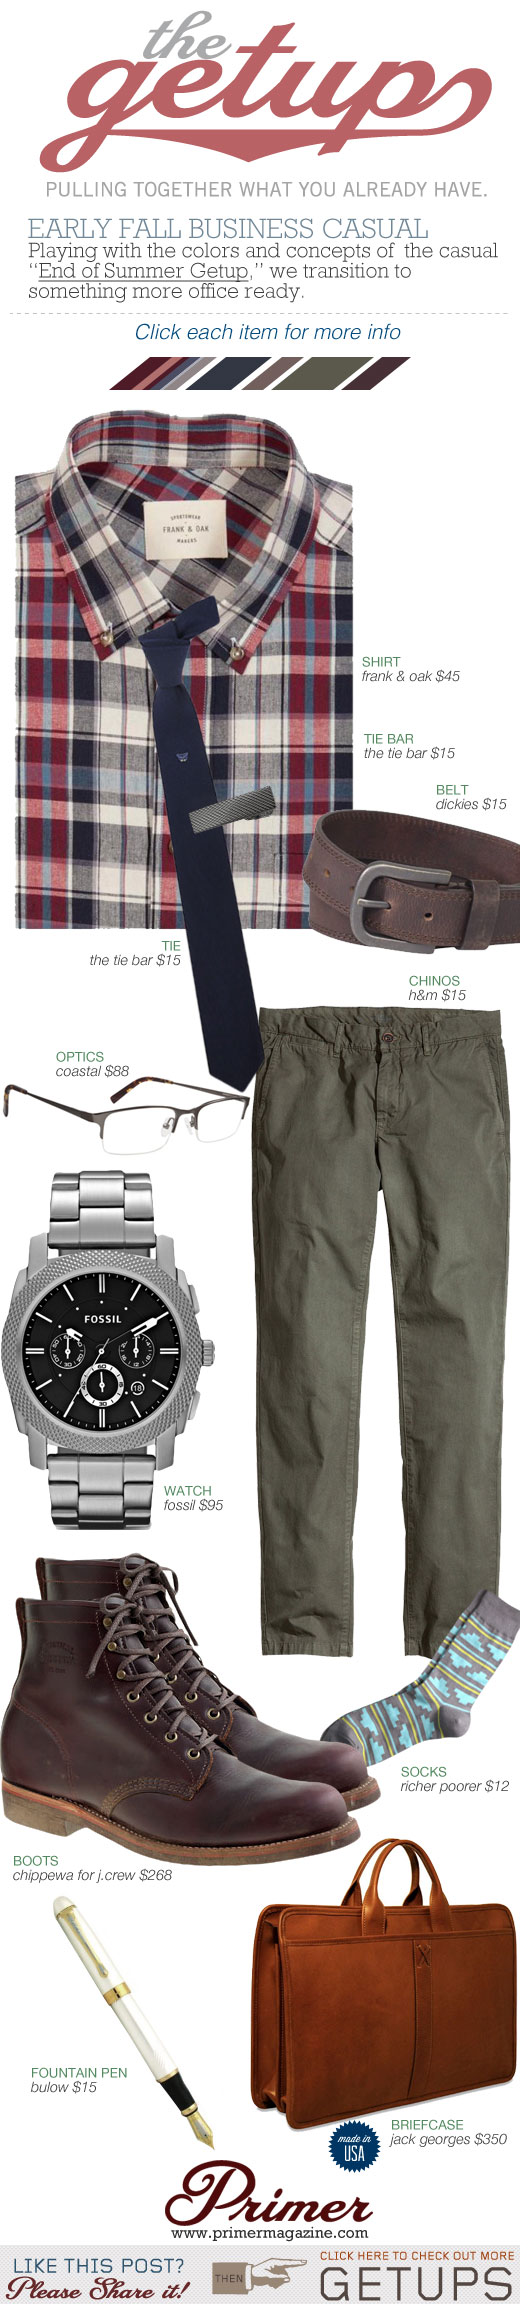 Getup - Early Fall Business Casual - Red plaid shirt, blue tie, olive chinos, glasses